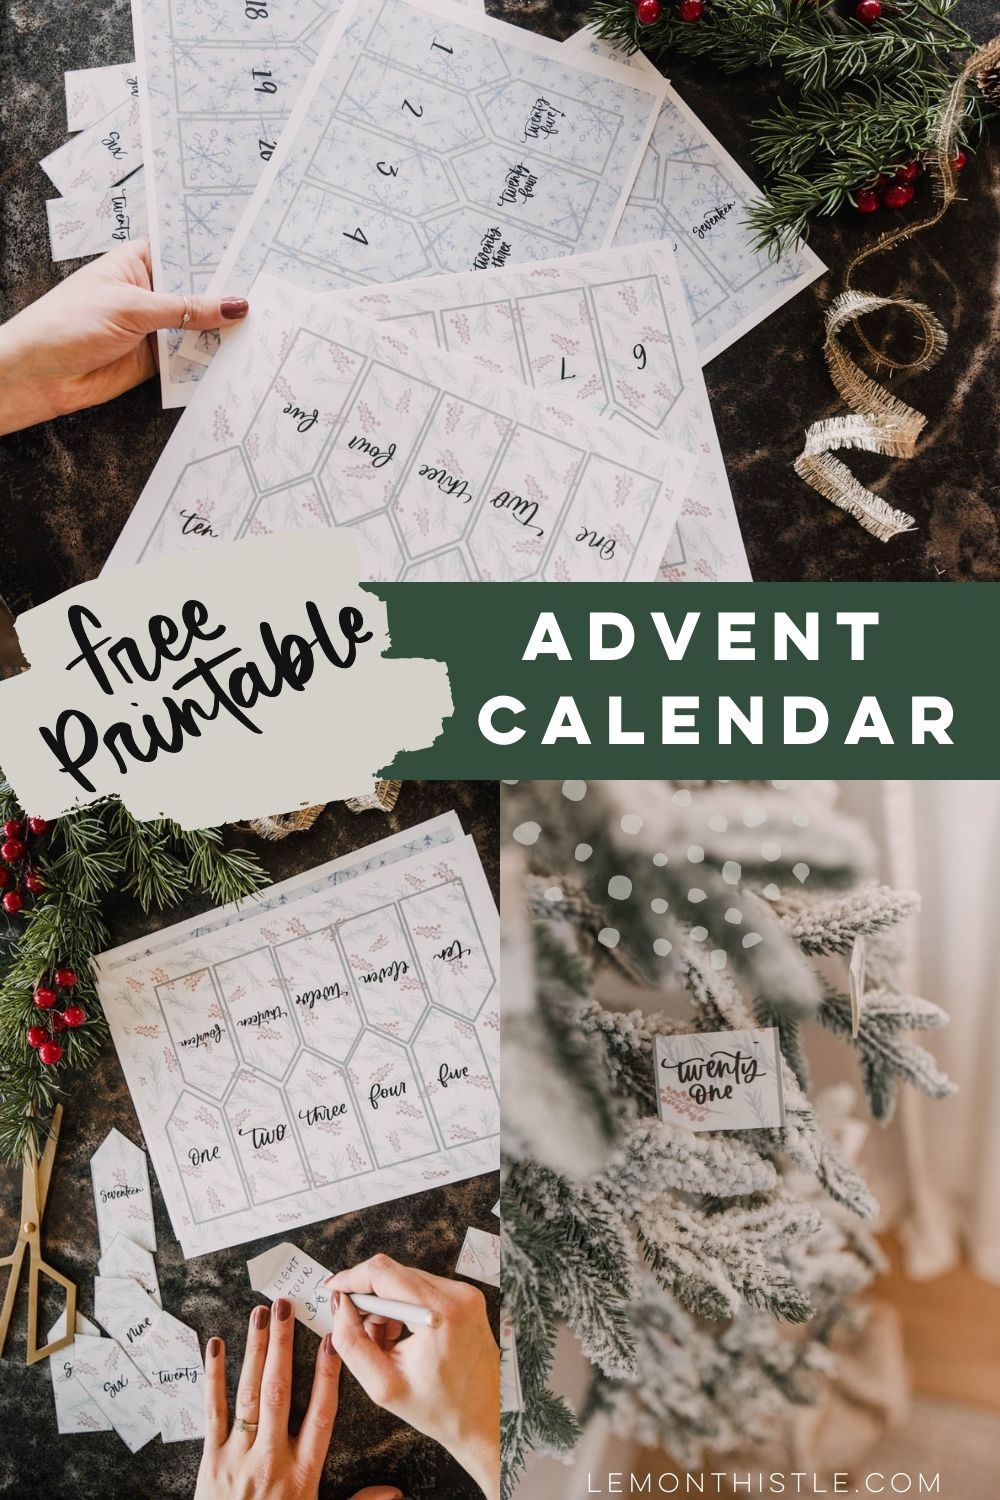 free printable advent calendar perfect for activities instead of treats